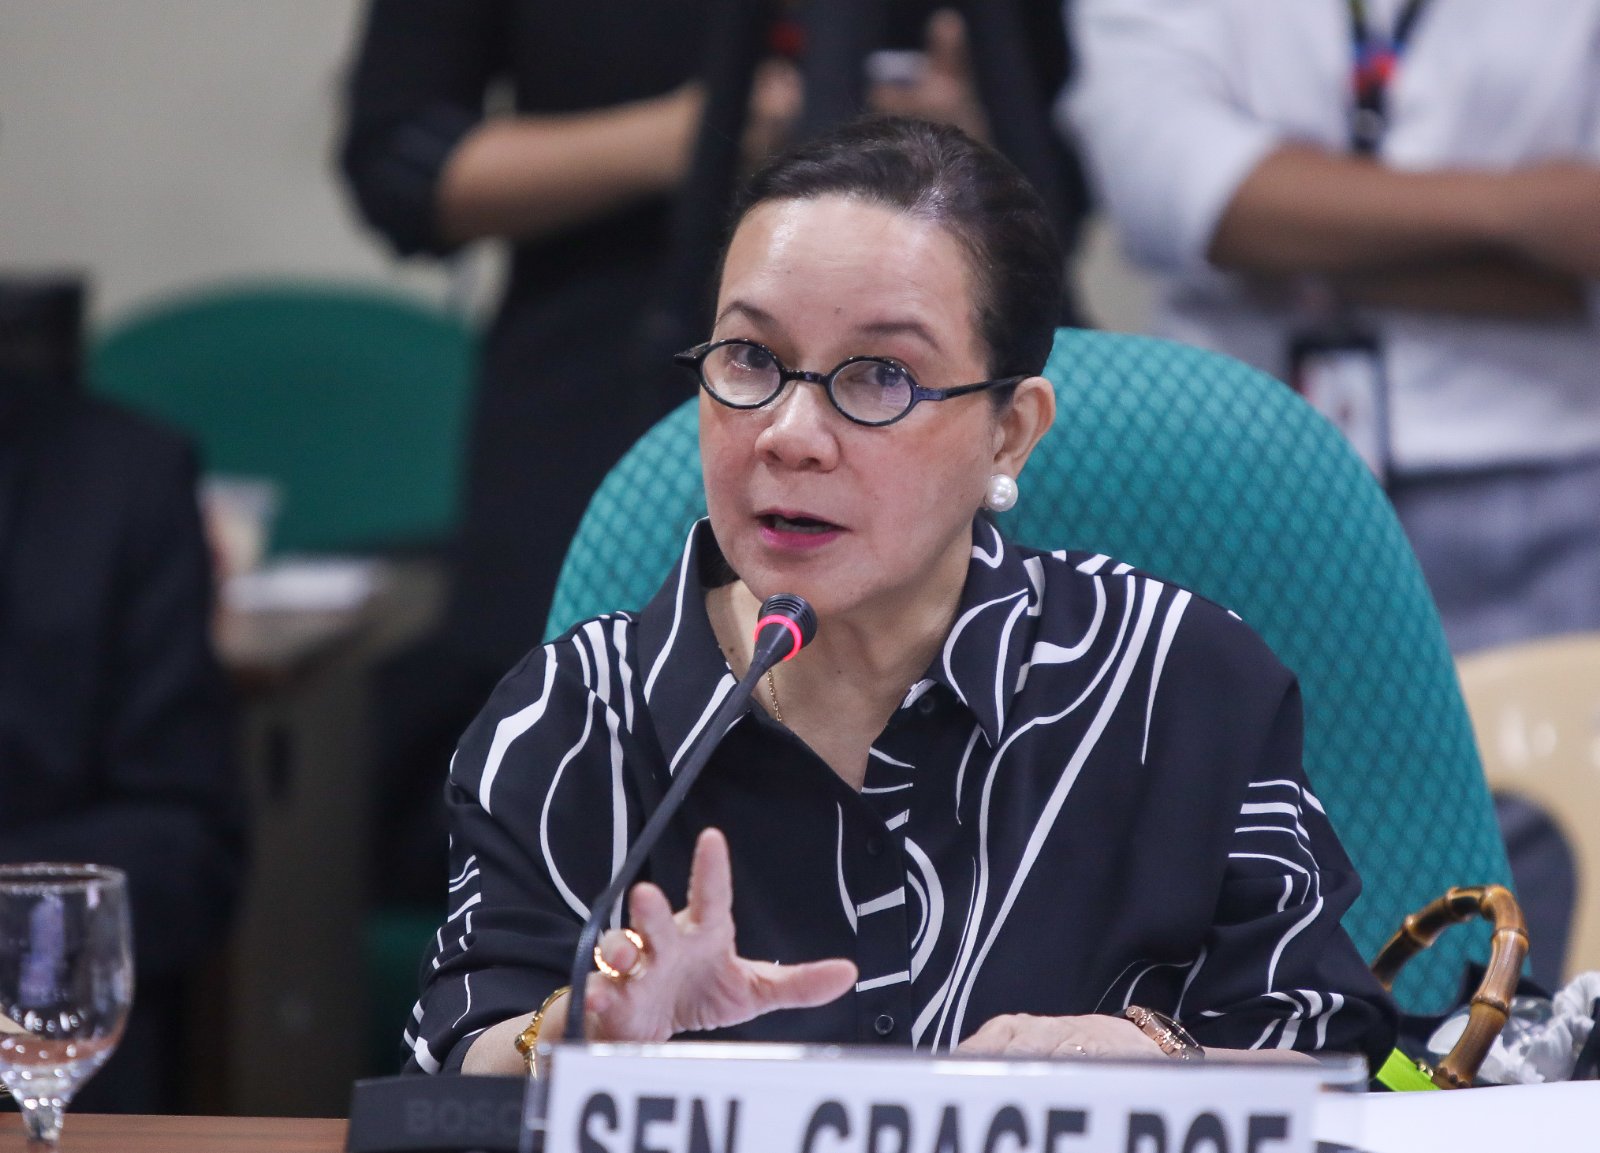 Poe thanks media for covering 'dry' topic